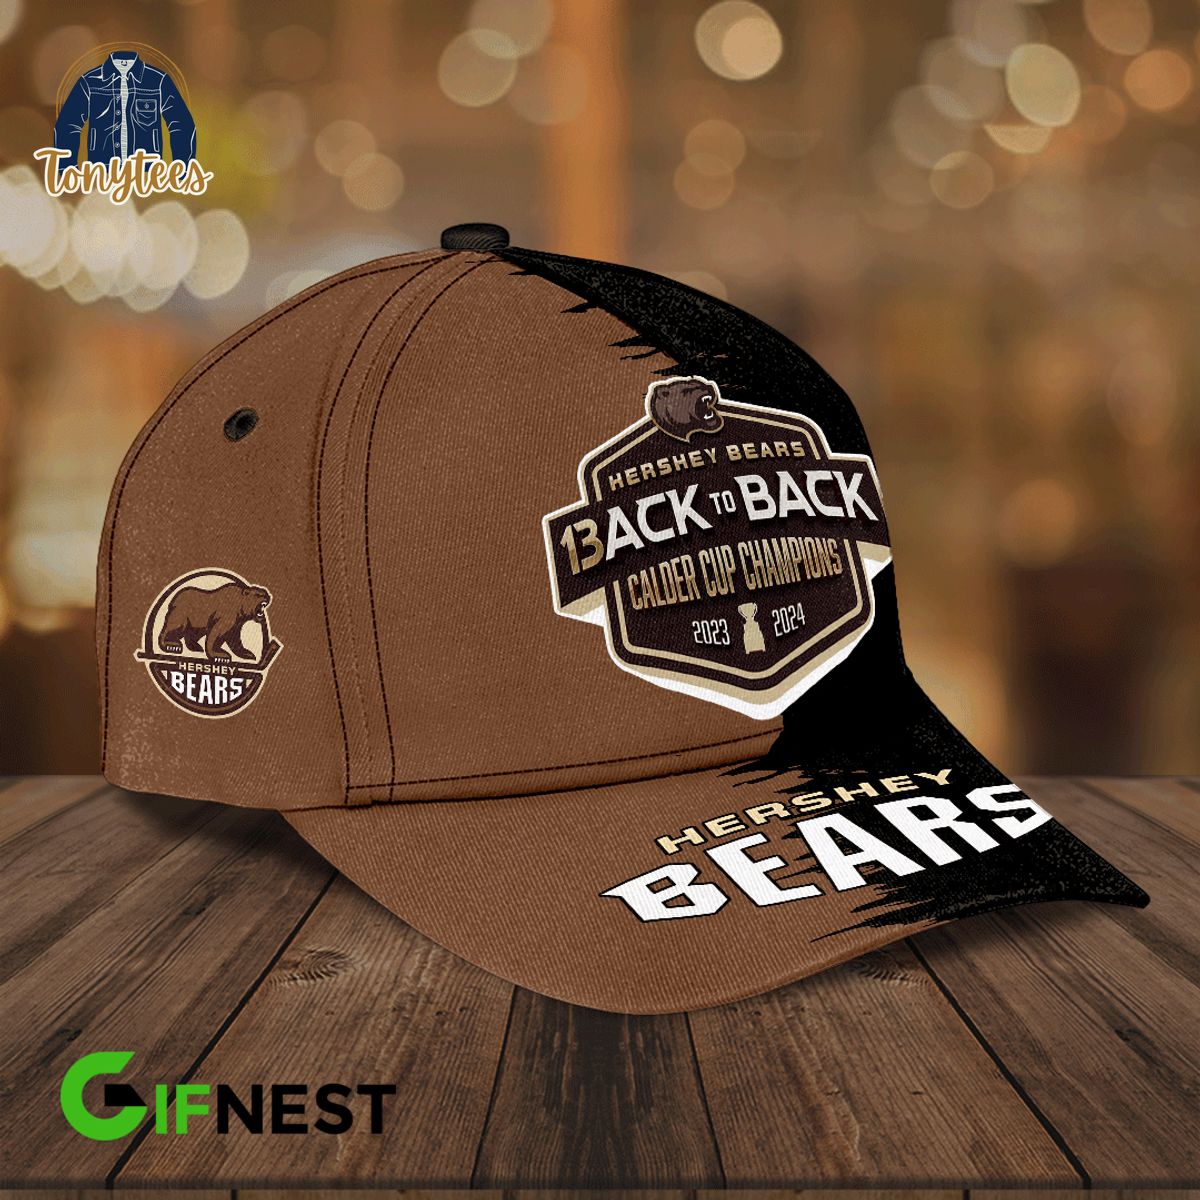 Hershey Bears Back To Back Calder Cup Champions 2024 Classic Cap